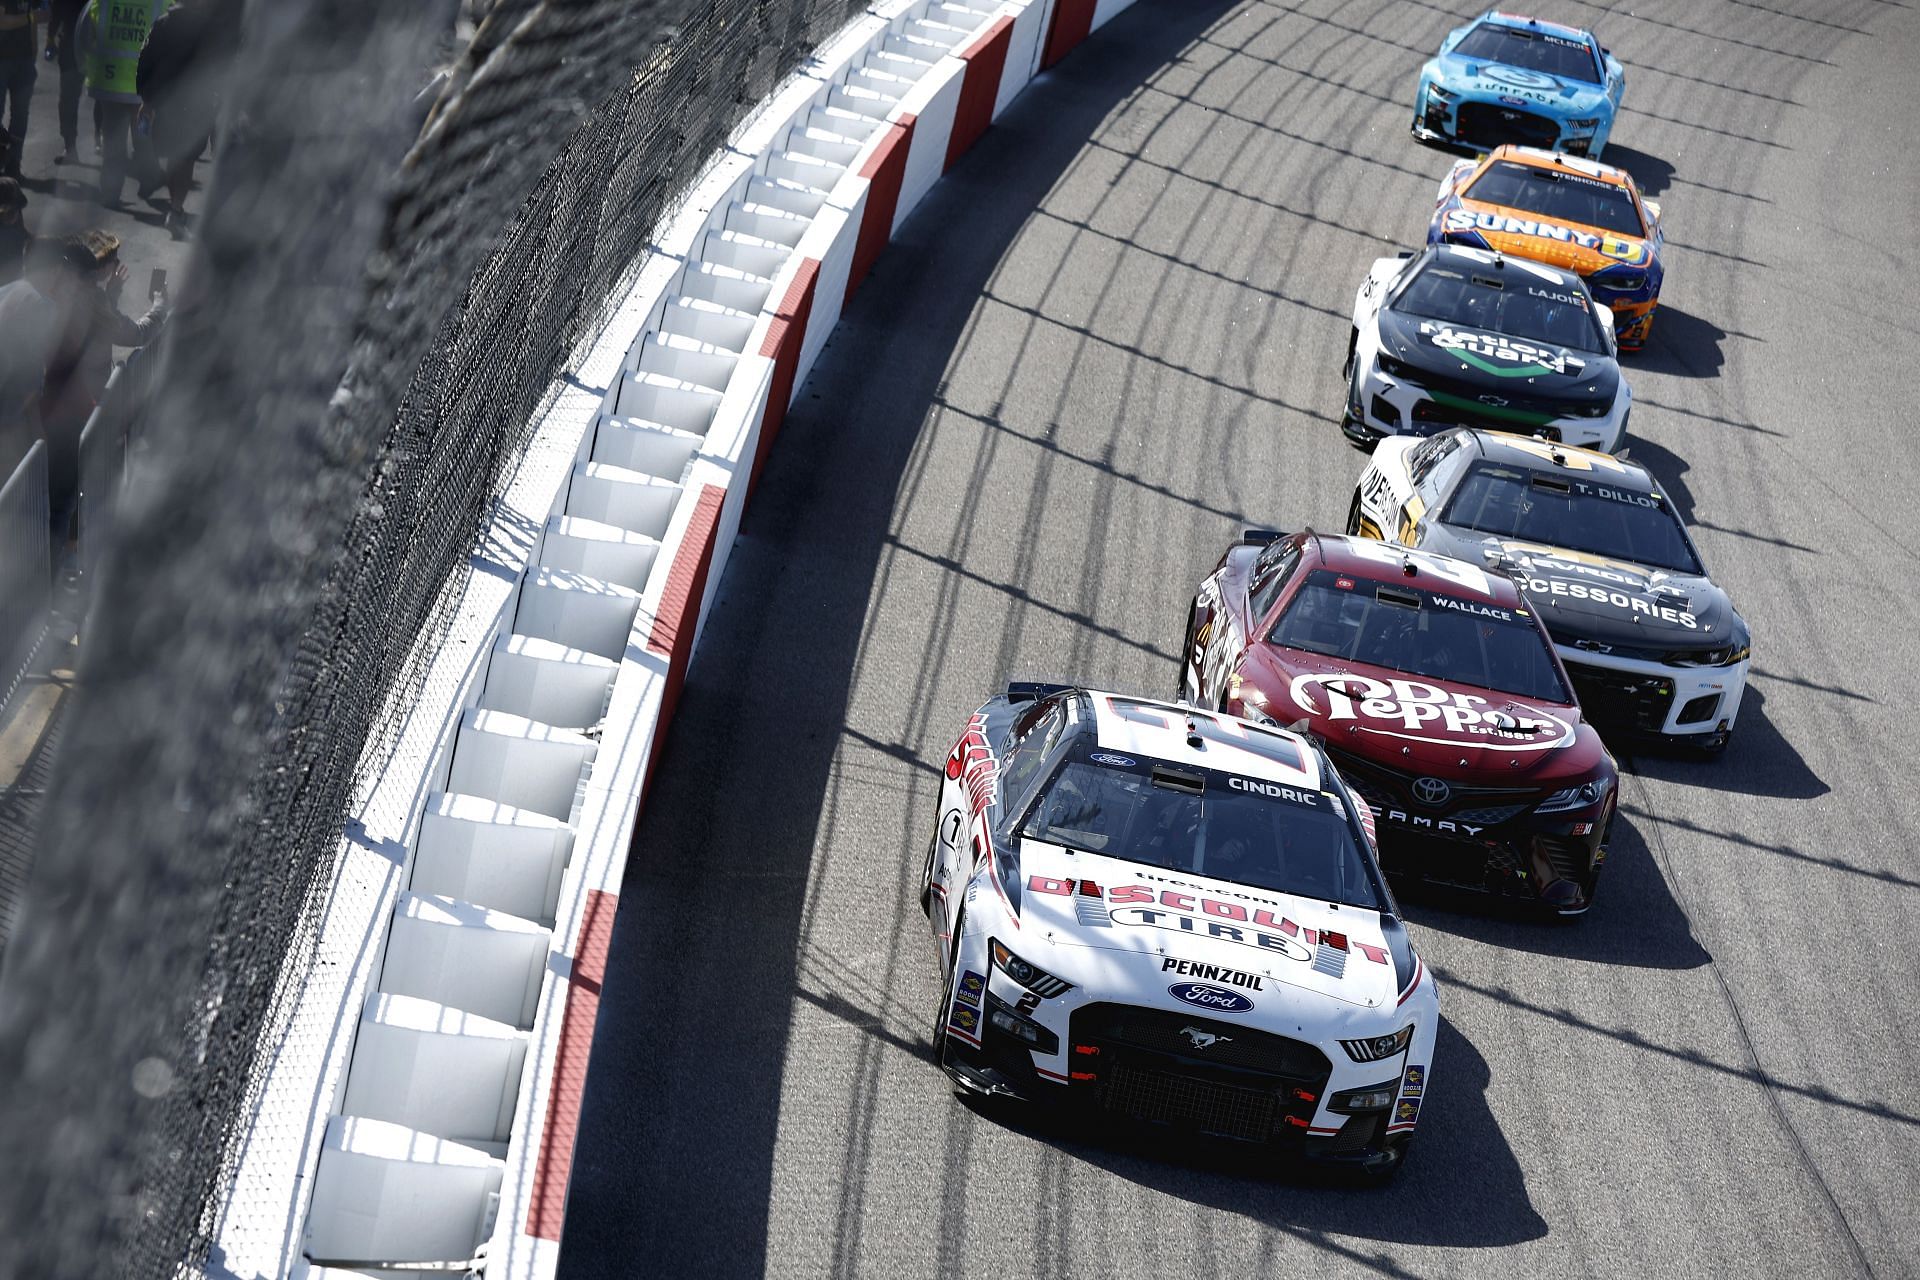 NASCAR 2022 Where to watch Federated Auto Parts 400 at Richmond Raceway race? Time, TV Schedule and Live Stream